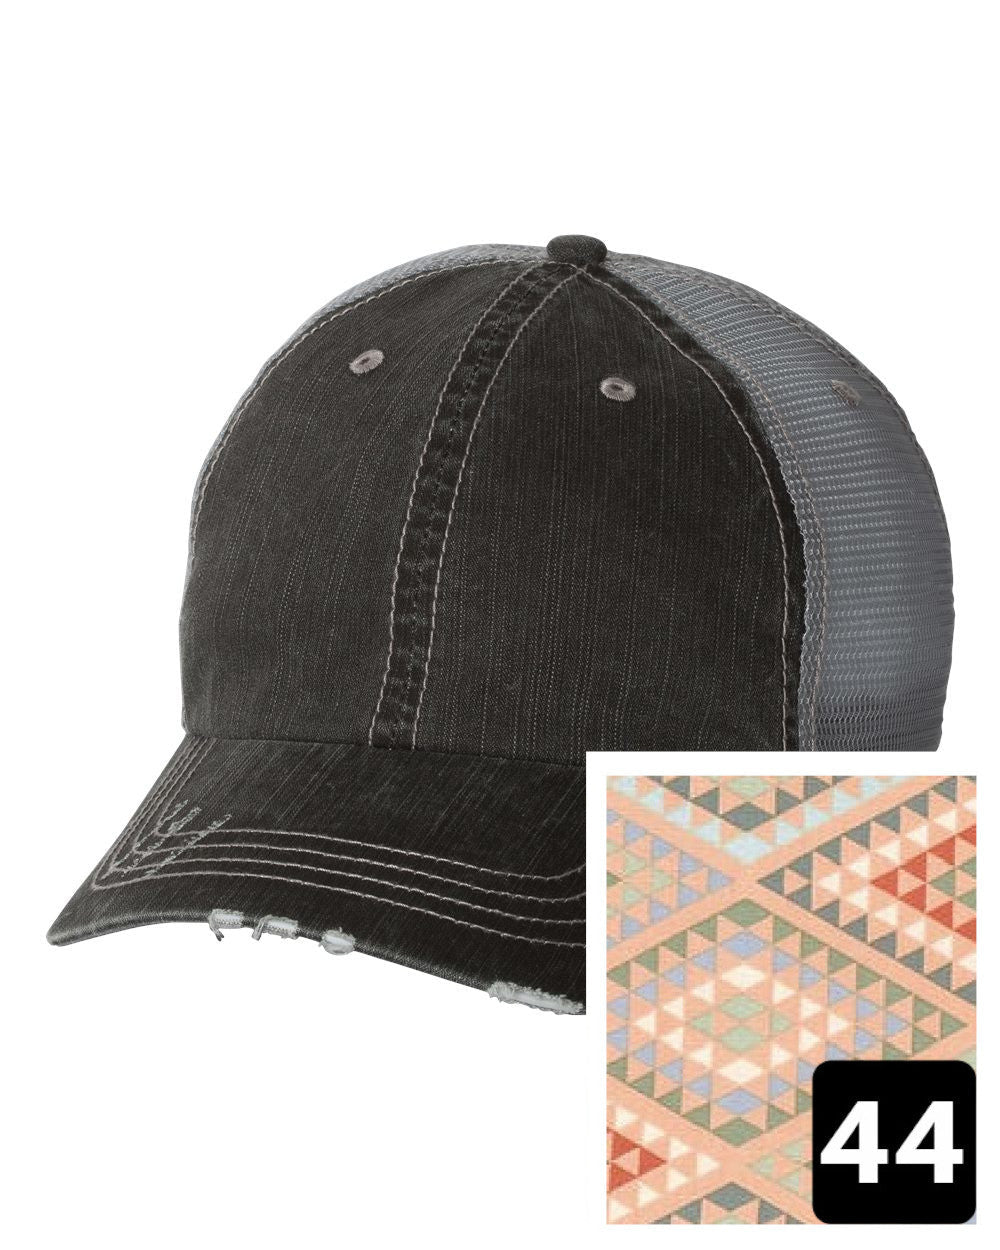 gray distressed trucker hat with navy coral and white chevron fabric state of New Jersey